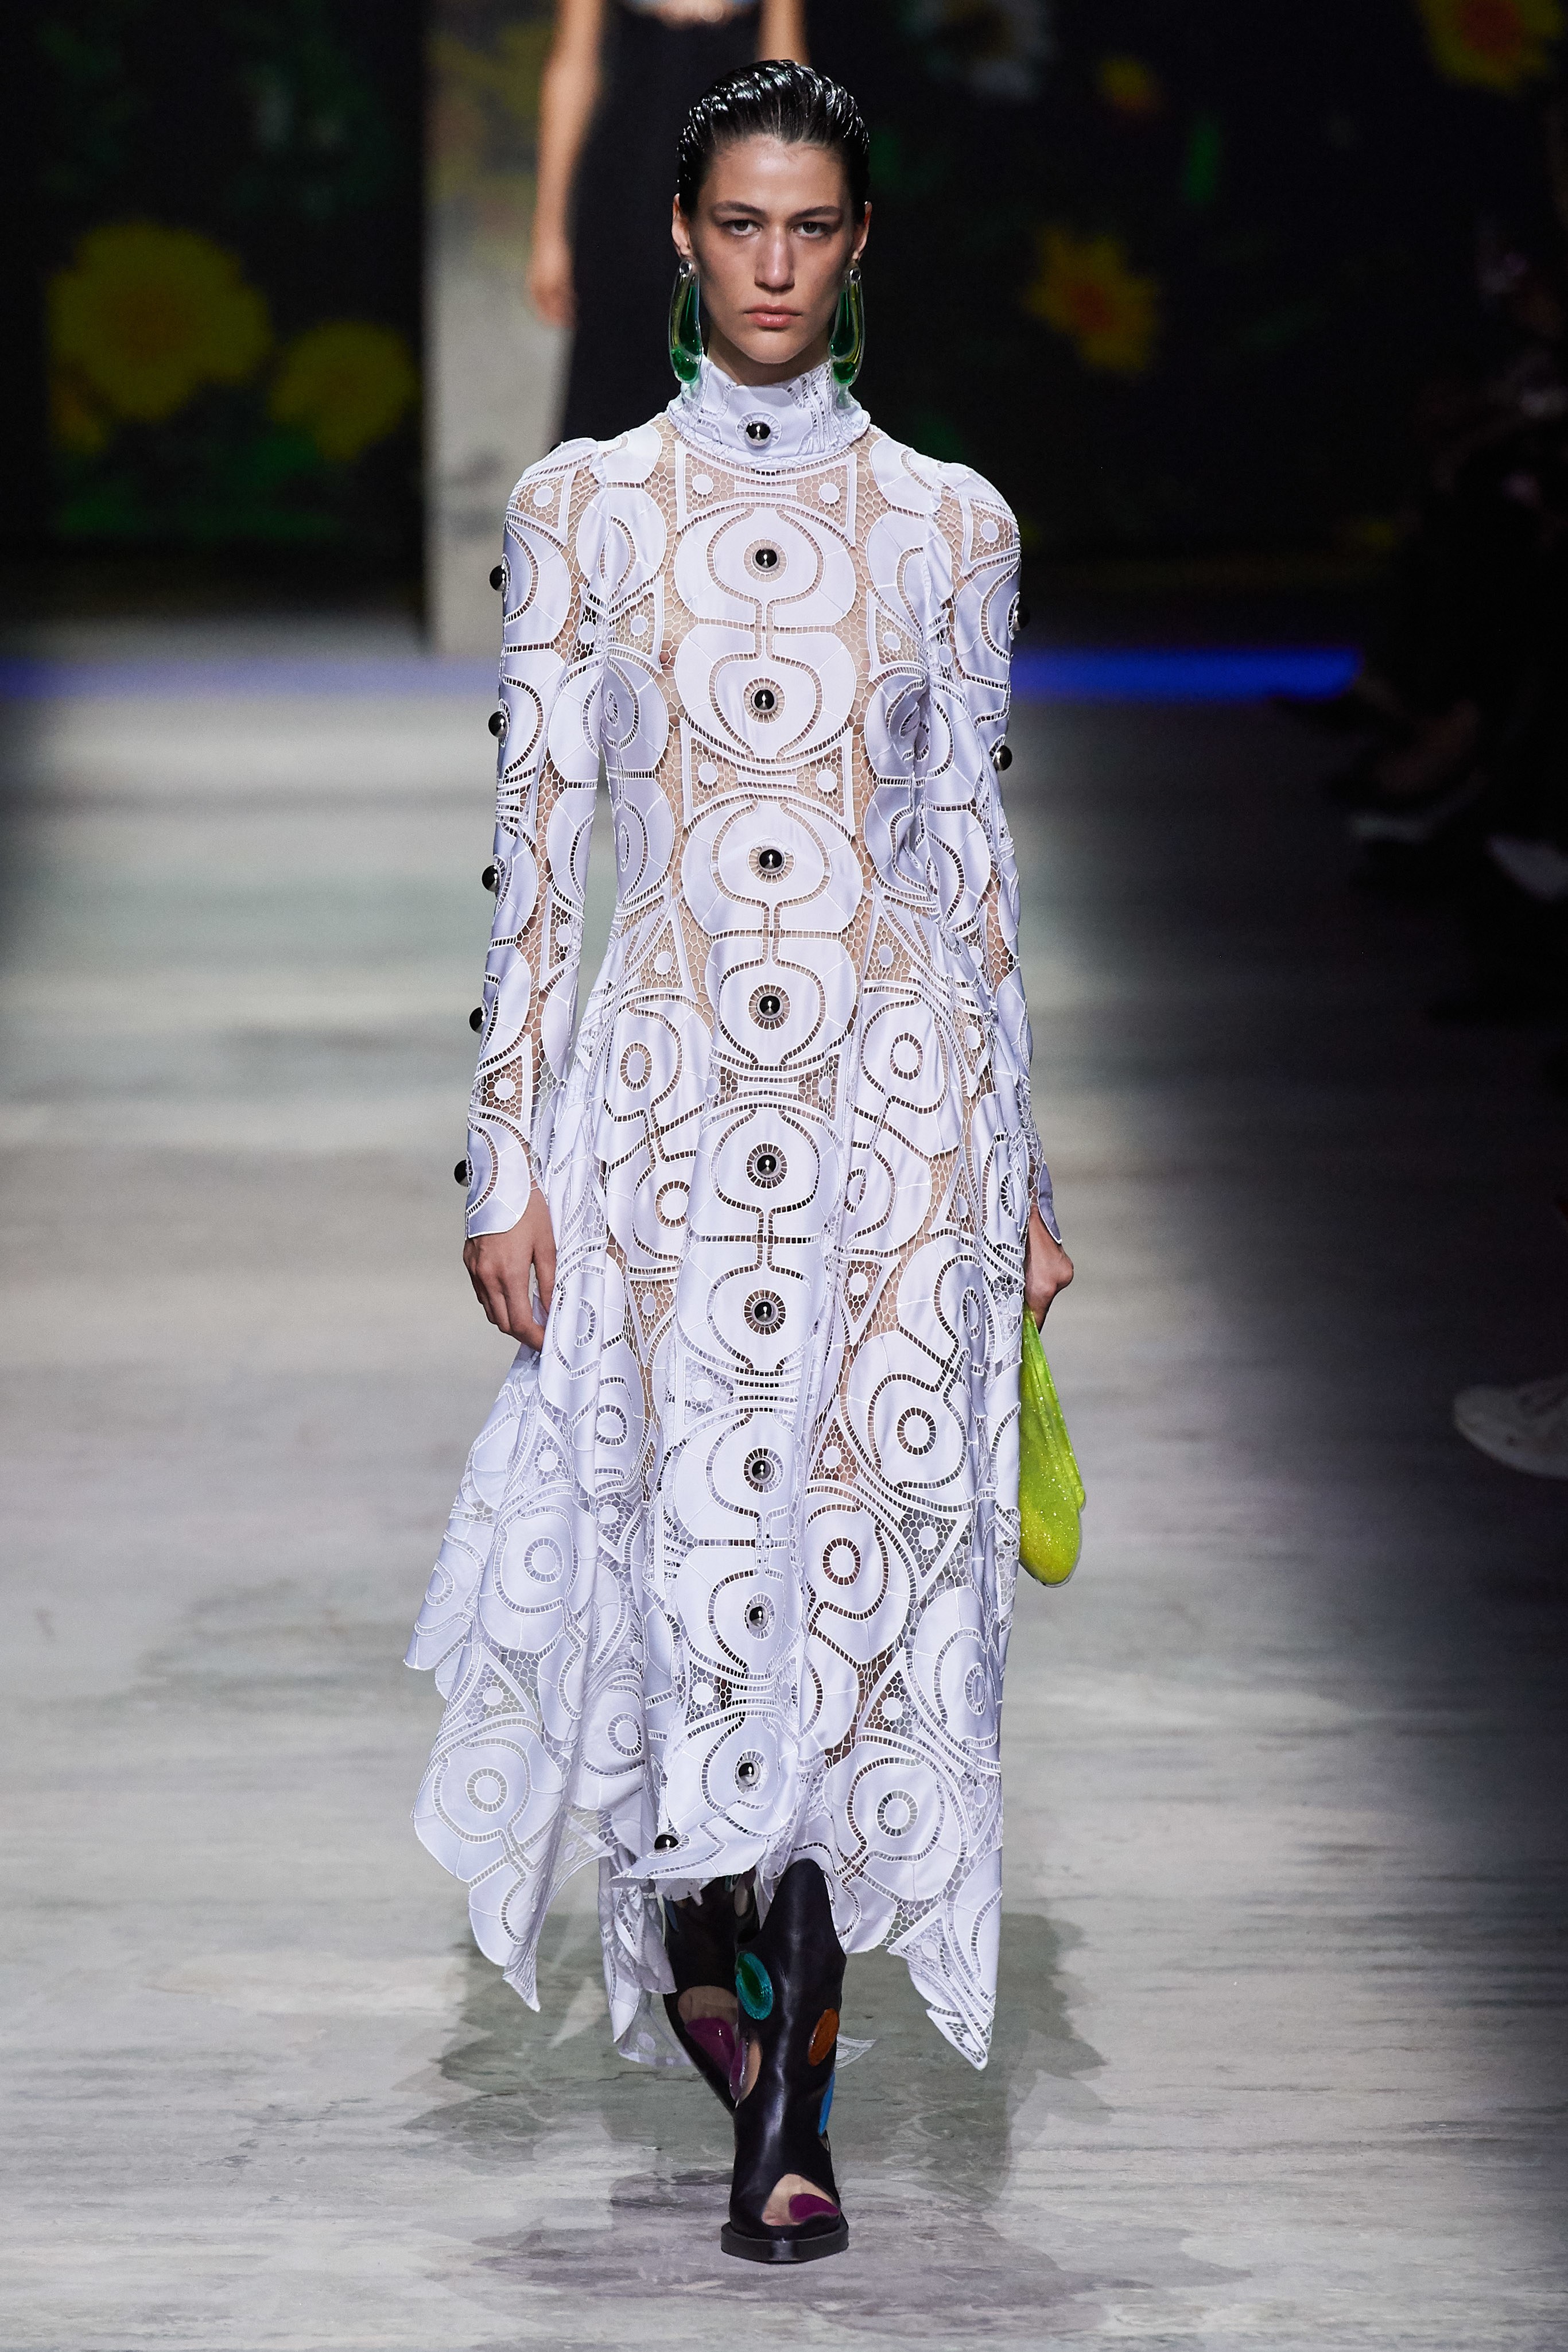 Christopher Kane Spring Summer 2020 SS2020 trends runway coverage Ready To Wear Vogue crochet